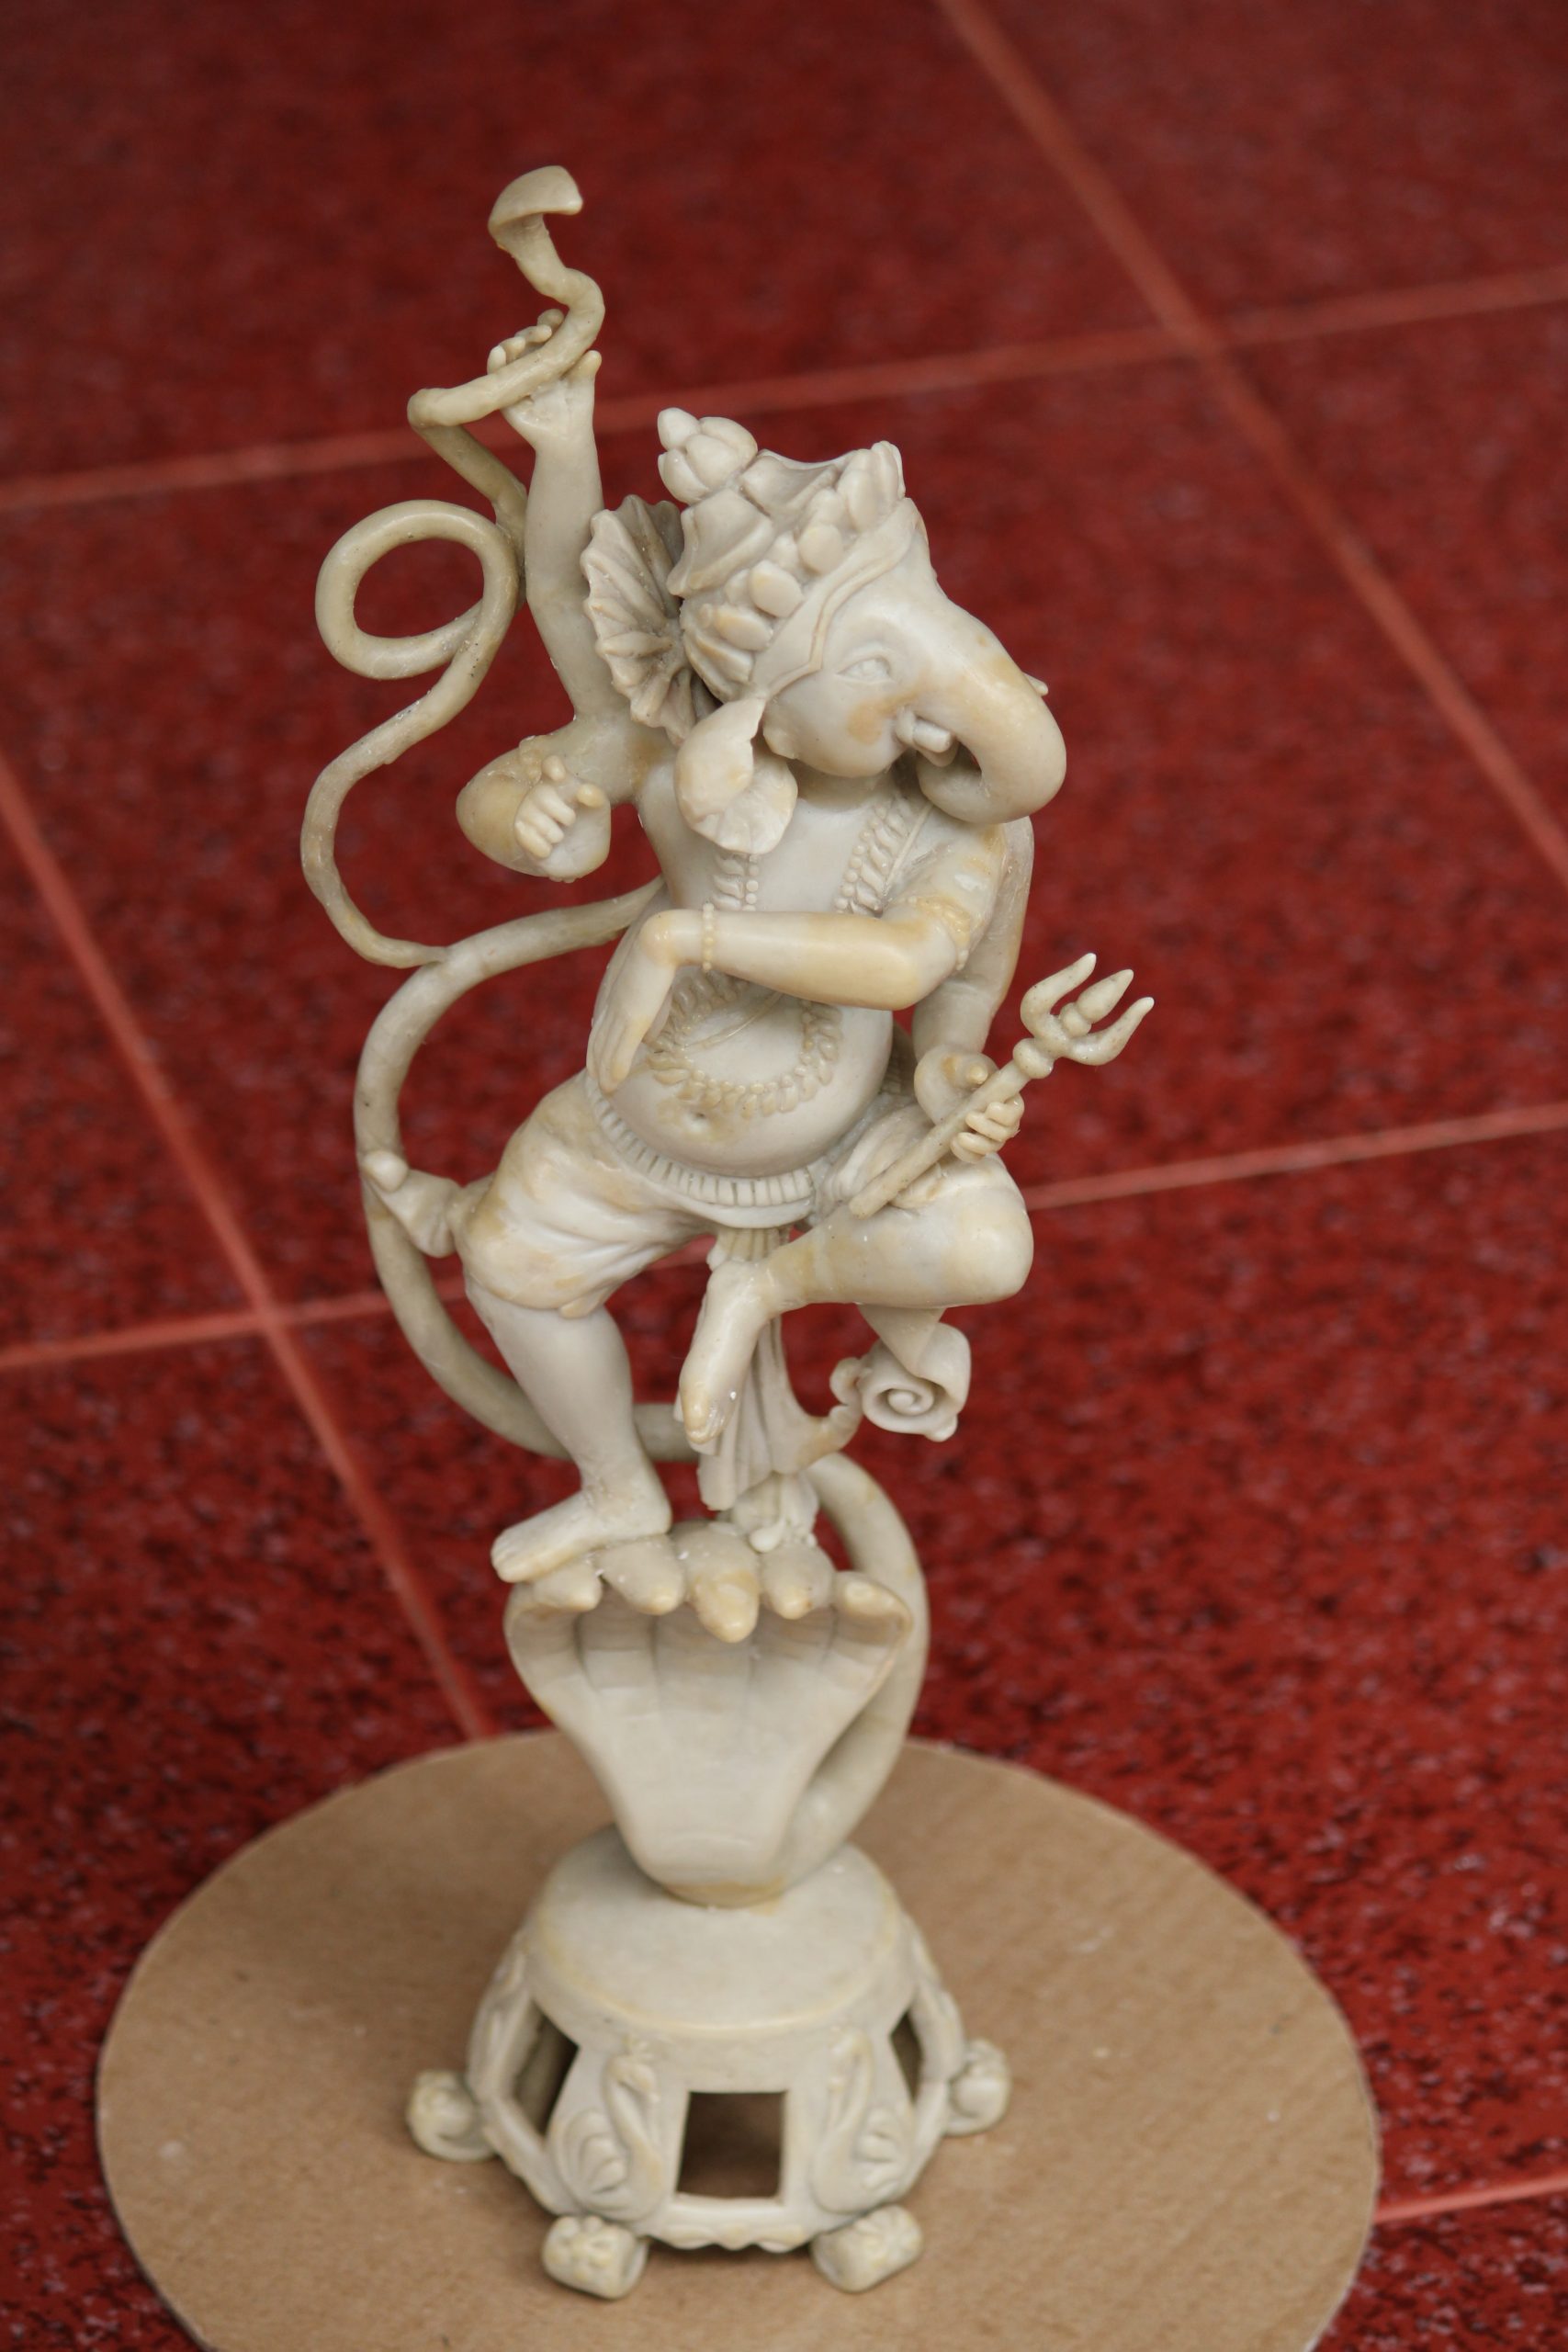 A statue of lord Ganesha